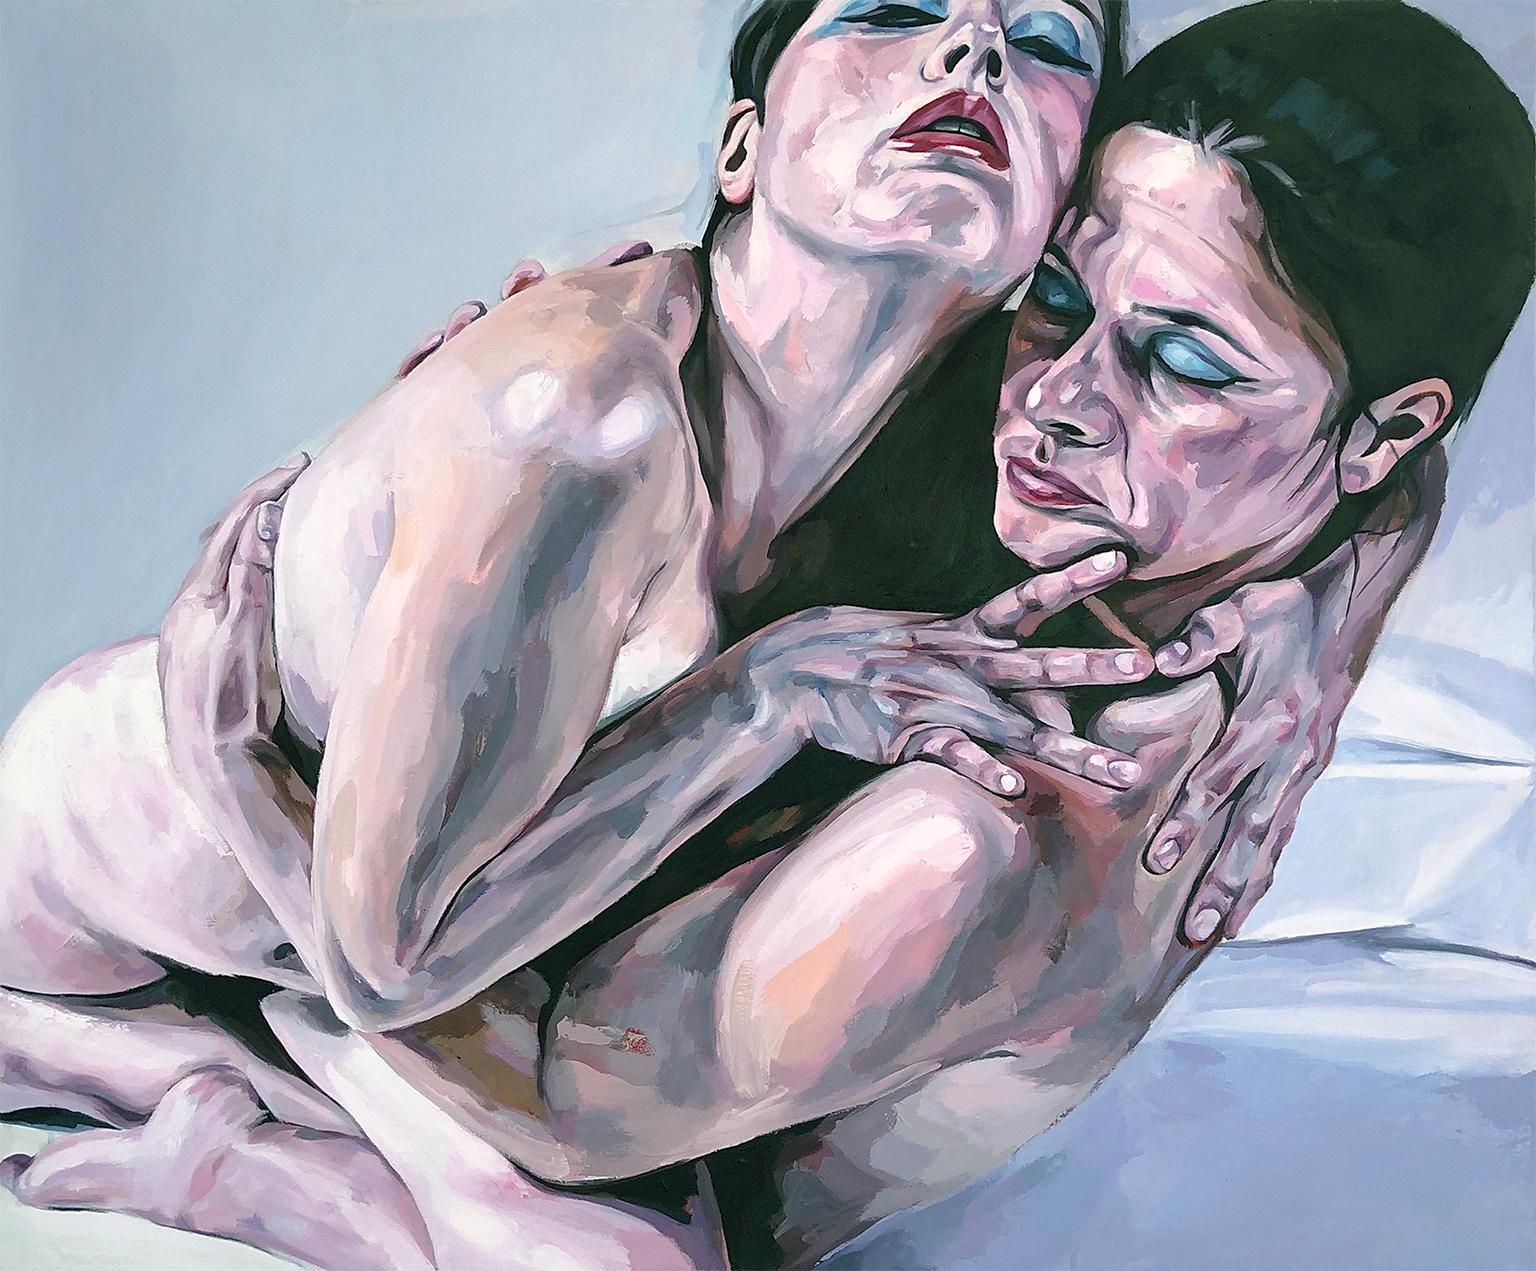 Duarte Victoria Figurative Painting - The Hug Of The Souls - Nude Contemporary Oil Painting